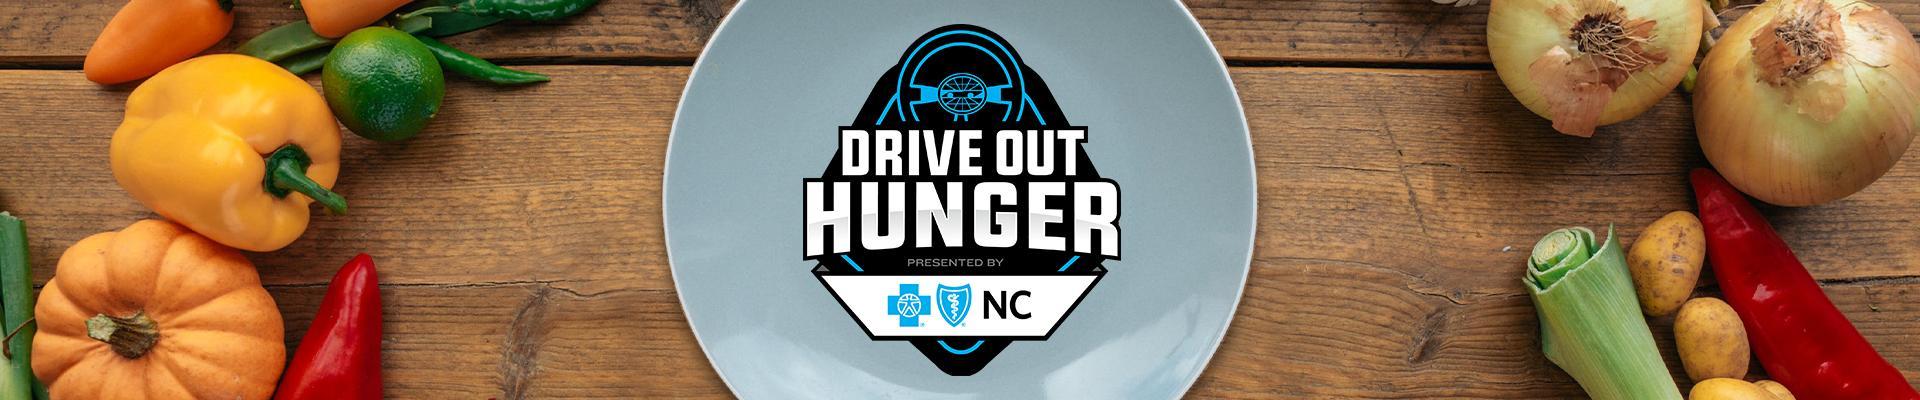 Drive Out Hunger Header